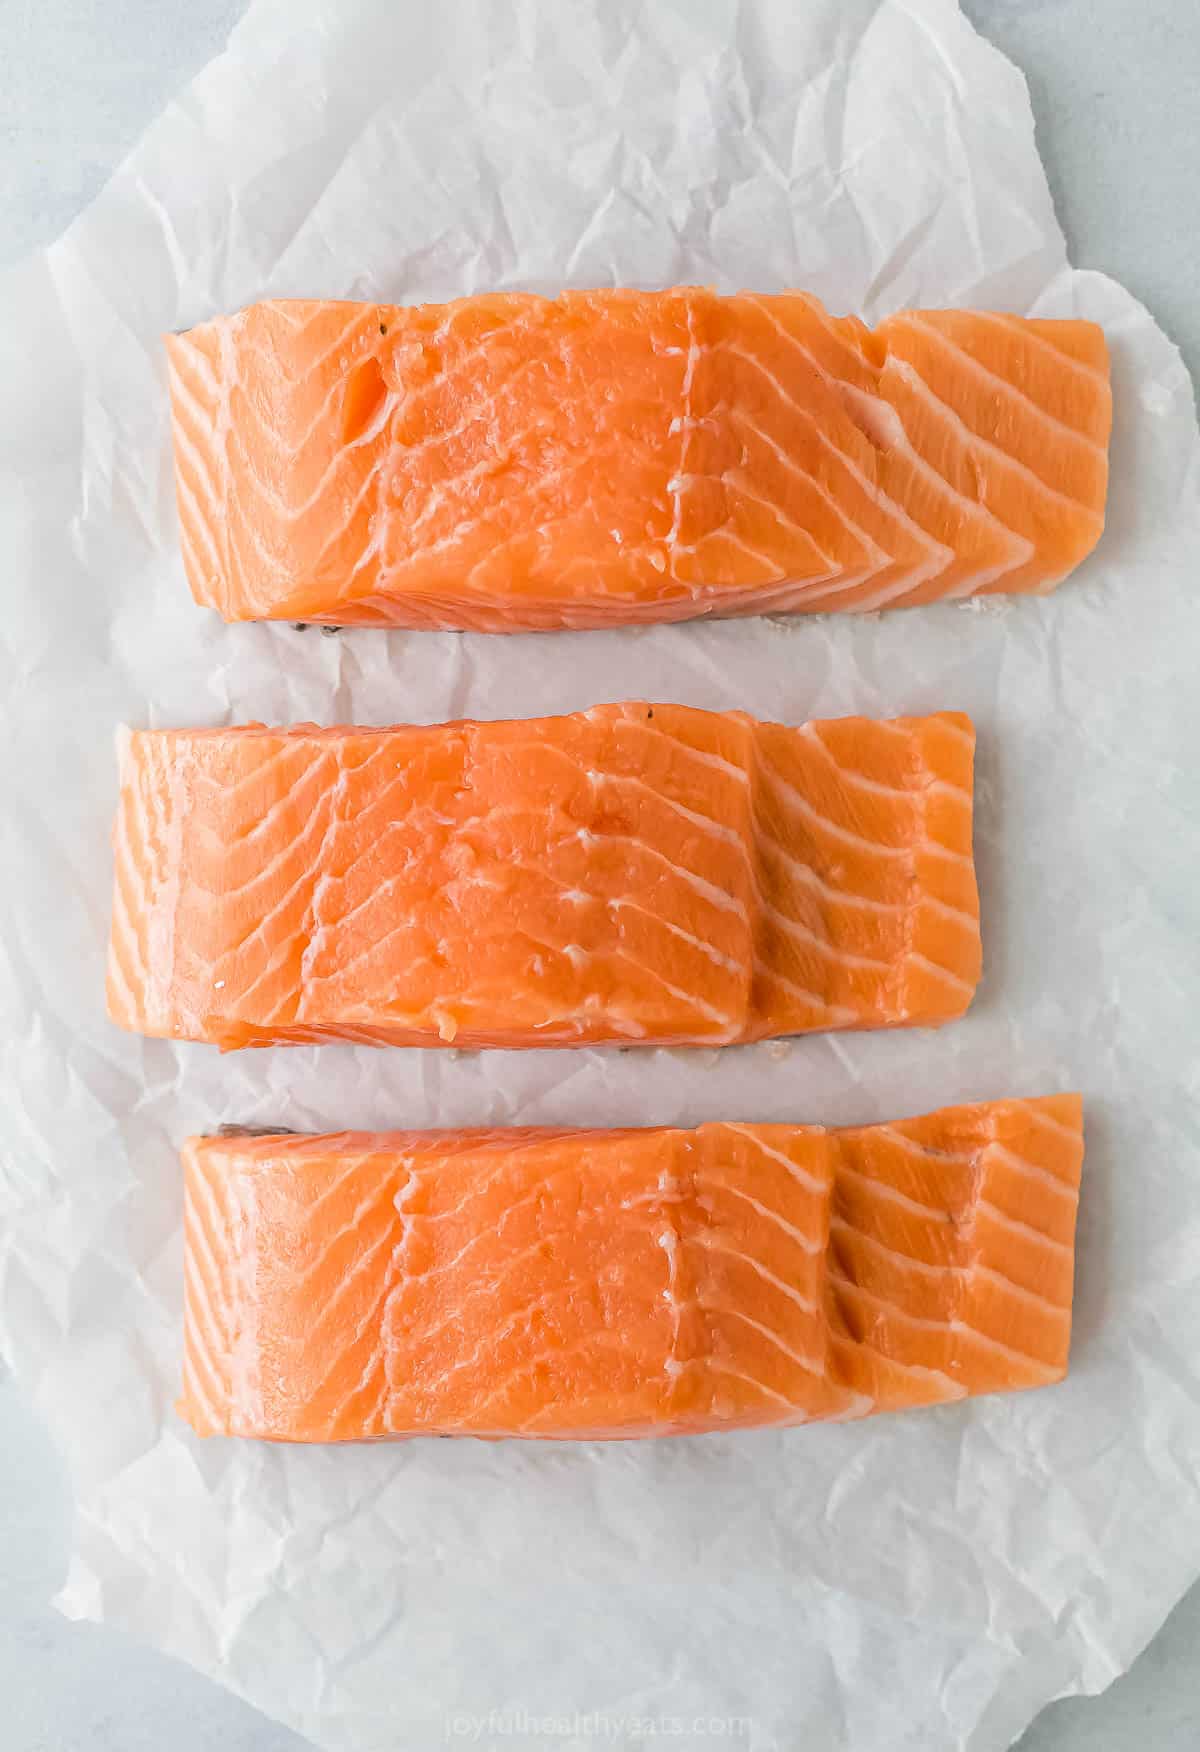 Three wild-caught salmon fillets lined up on a sheet of parchment paper